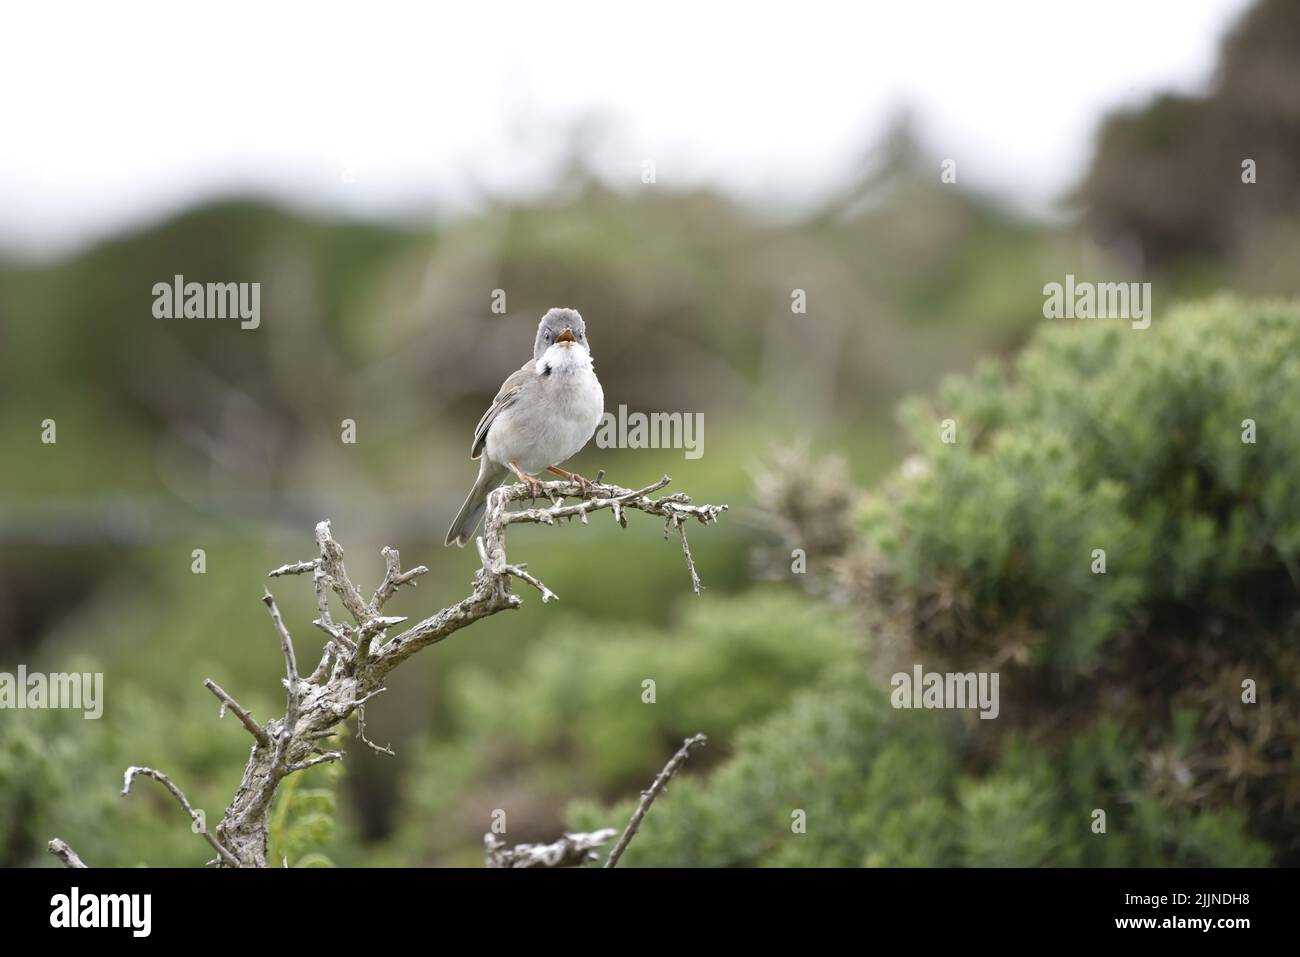 Foreground Facing Image of a Singing Common Whitethroat (Sylvia communis) Left of Image, with Copy Space to Right, Against Green Shrubs Background, UK Stock Photo